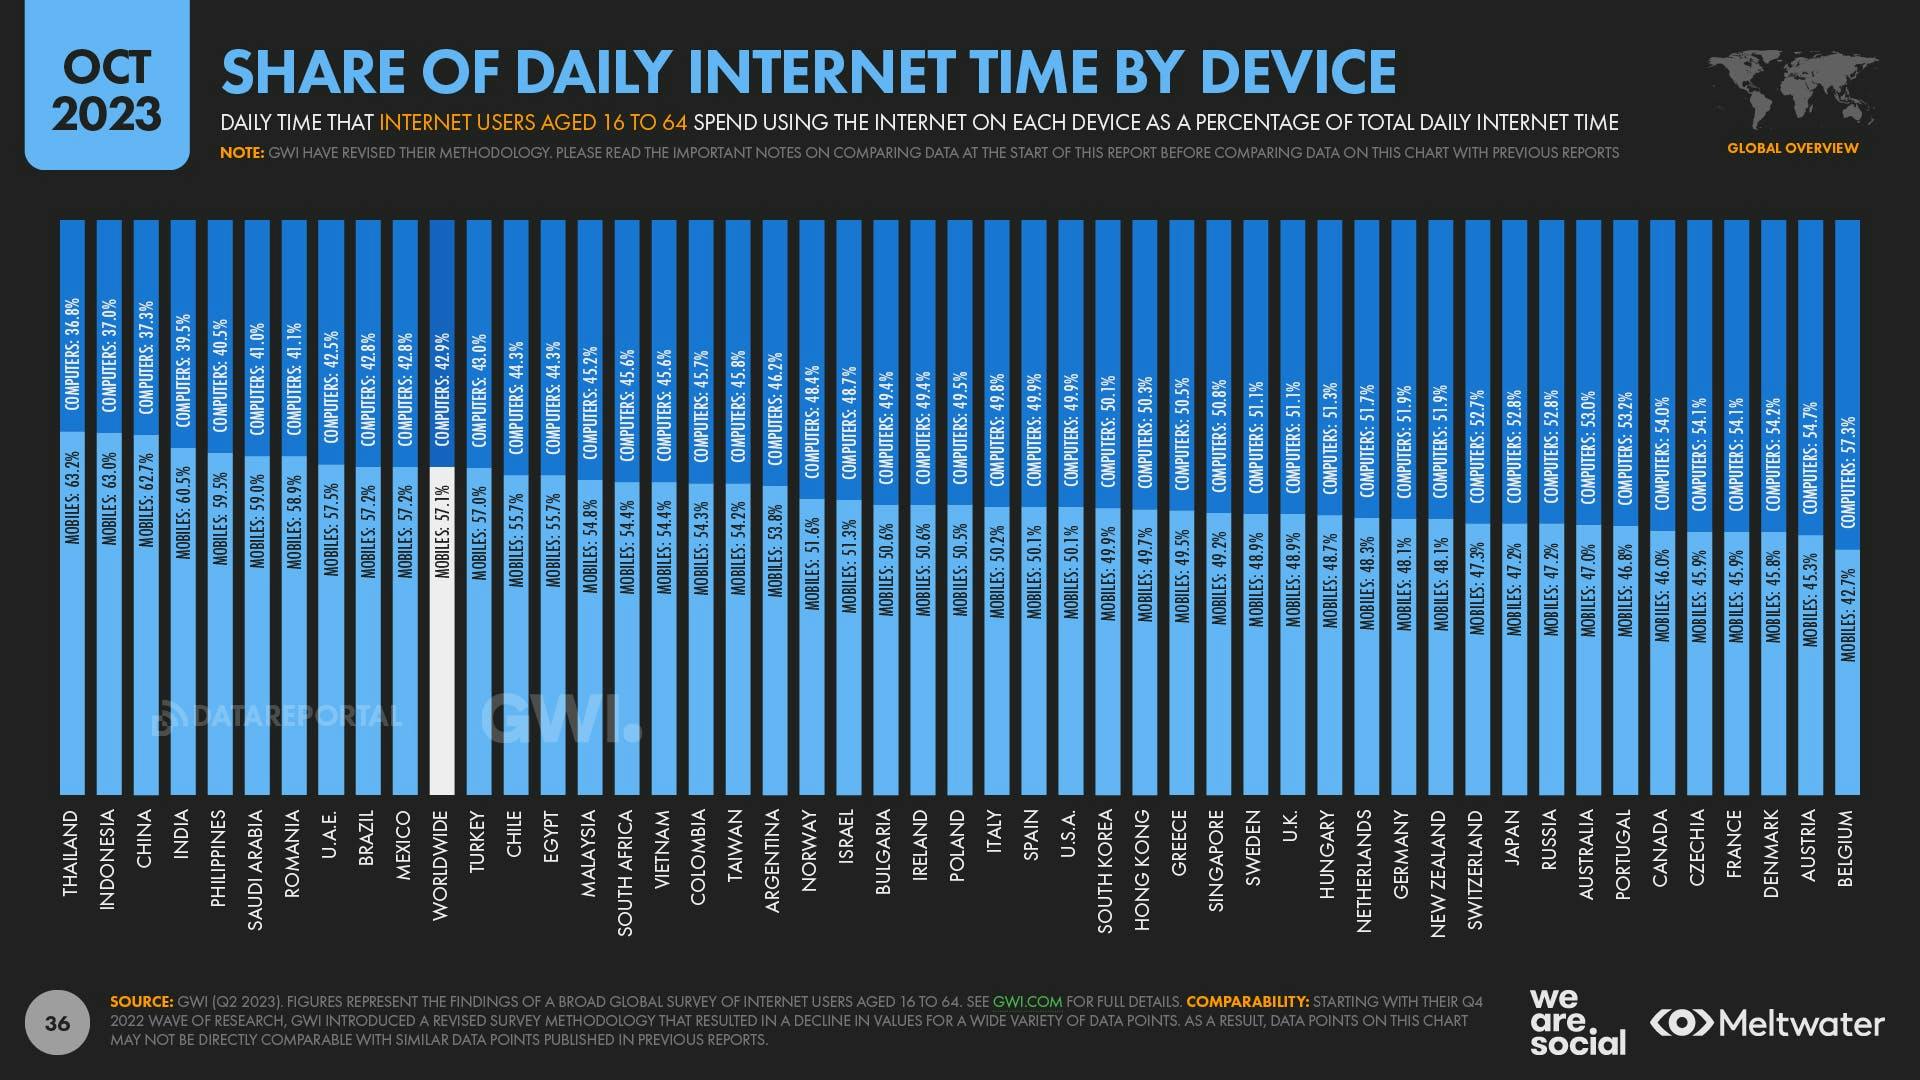 October 2023 Global Digital Report: Share of daily internet time by device country chart